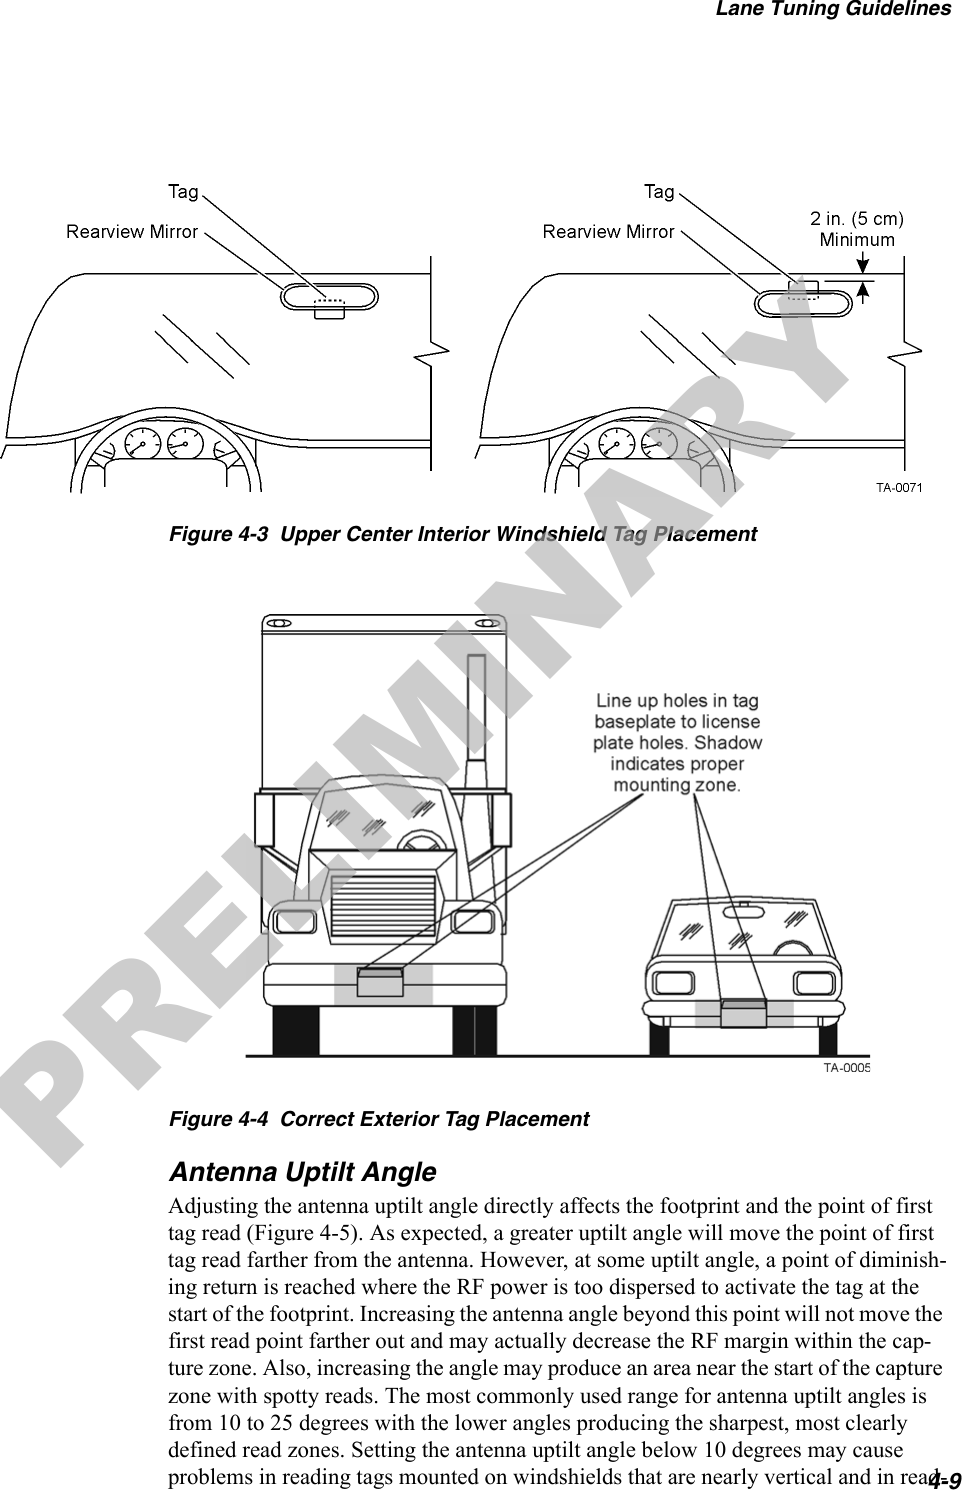 Lane Tuning Guidelines4-9Figure 4-3  Upper Center Interior Windshield Tag PlacementFigure 4-4  Correct Exterior Tag PlacementAntenna Uptilt AngleAdjusting the antenna uptilt angle directly affects the footprint and the point of first tag read (Figure 4-5). As expected, a greater uptilt angle will move the point of first tag read farther from the antenna. However, at some uptilt angle, a point of diminish-ing return is reached where the RF power is too dispersed to activate the tag at the start of the footprint. Increasing the antenna angle beyond this point will not move the first read point farther out and may actually decrease the RF margin within the cap-ture zone. Also, increasing the angle may produce an area near the start of the capture zone with spotty reads. The most commonly used range for antenna uptilt angles is from 10 to 25 degrees with the lower angles producing the sharpest, most clearly defined read zones. Setting the antenna uptilt angle below 10 degrees may cause problems in reading tags mounted on windshields that are nearly vertical and in read-PRELIMINARY